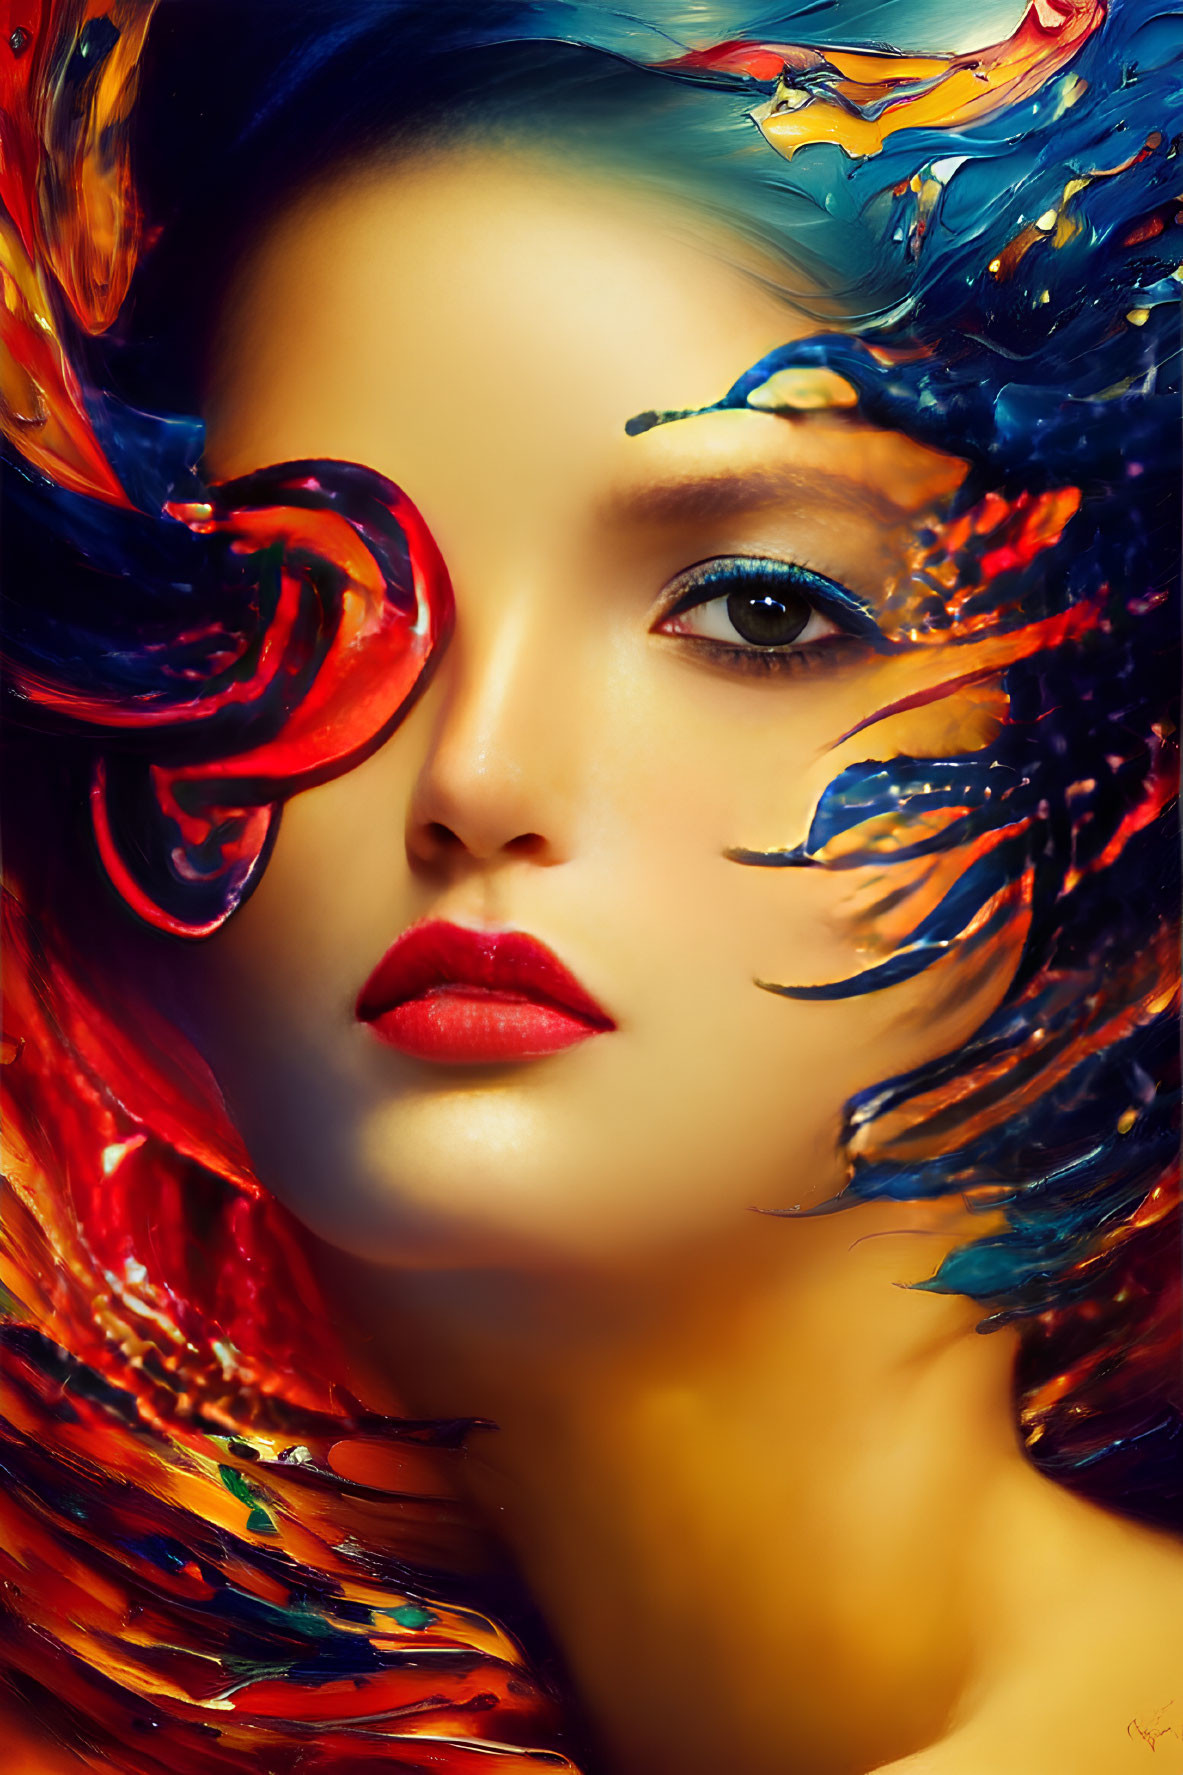 Colorful Abstract Digital Artwork of Woman with Swirling Feathers